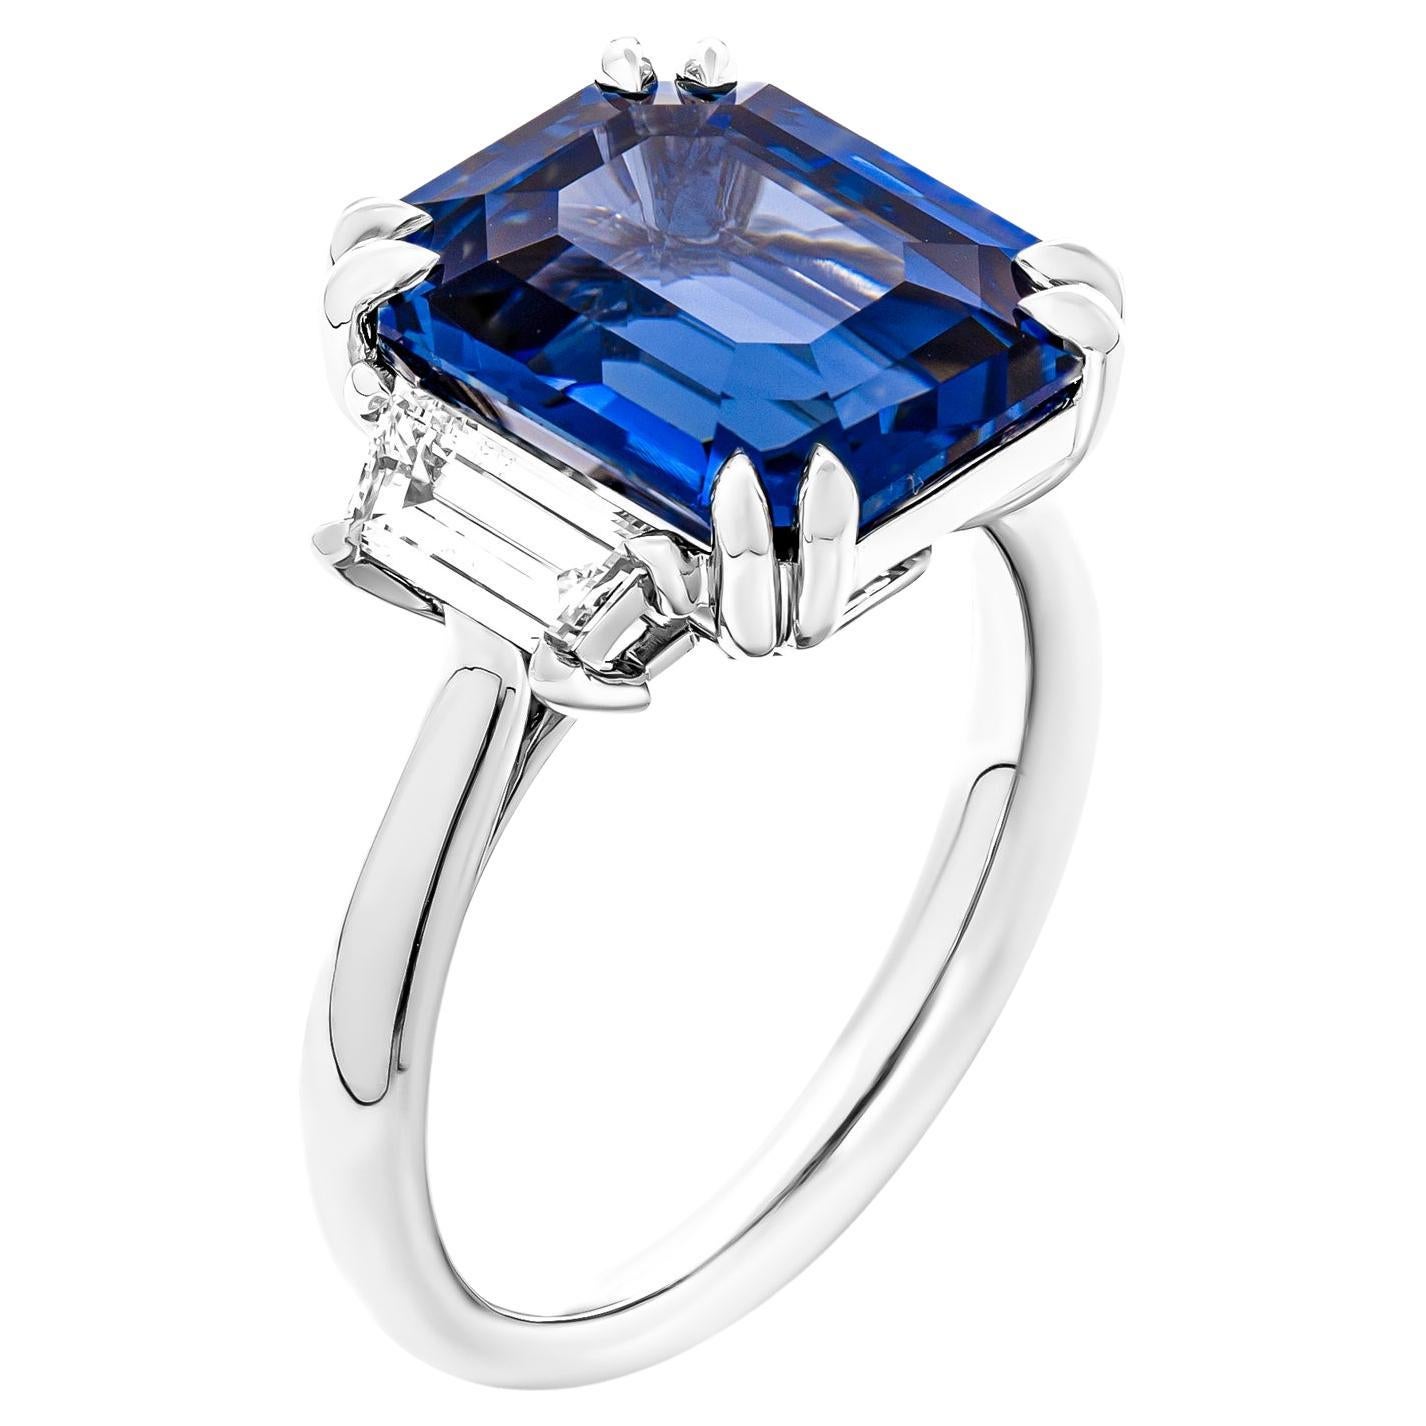 Certified 3 Stone Ring with 7.97ct Emerald Cut Blue Sapphire For Sale